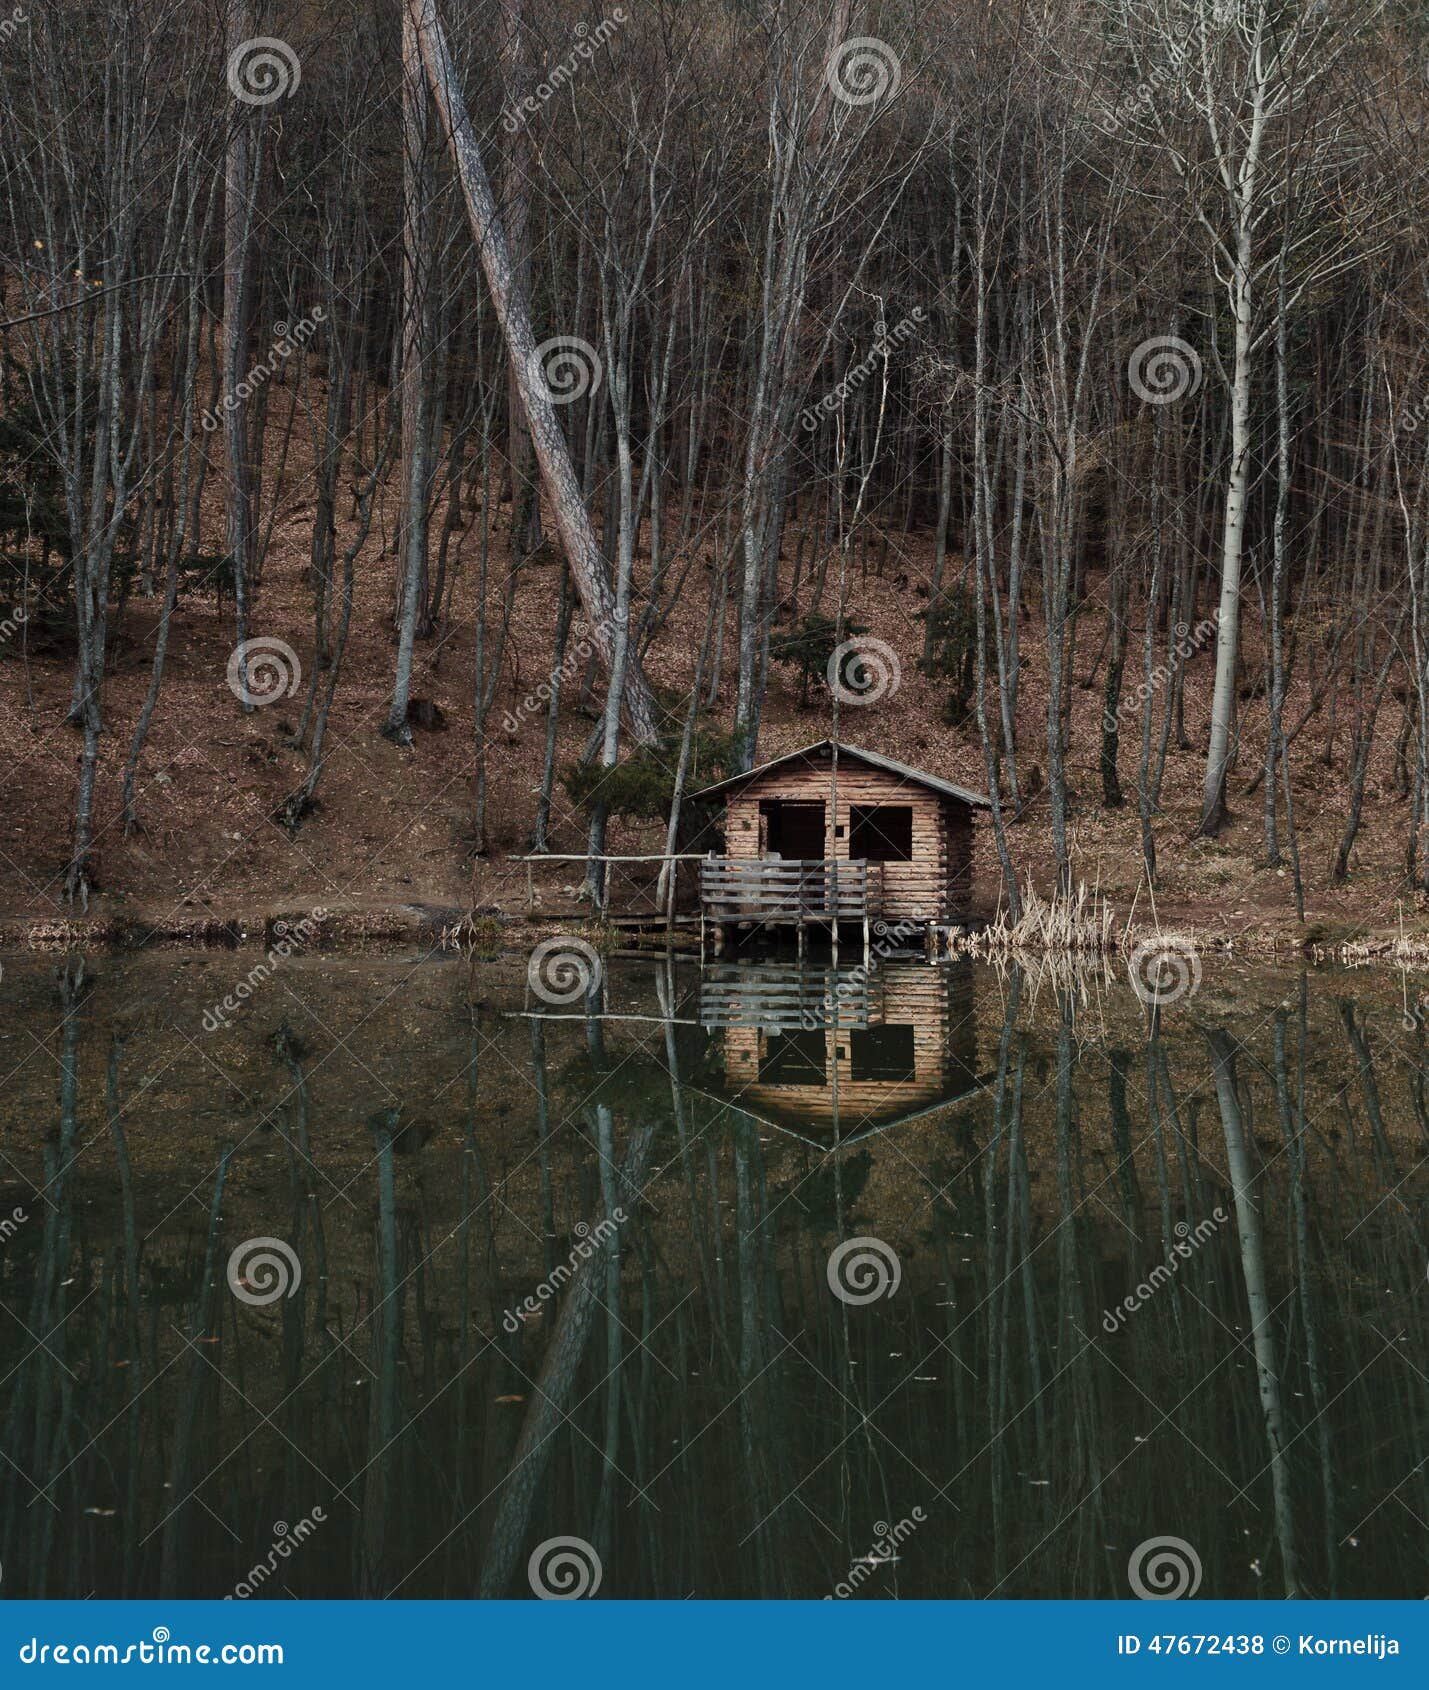 Albums 91+ Pictures Fishing Hut On A Lake In Germany Updated